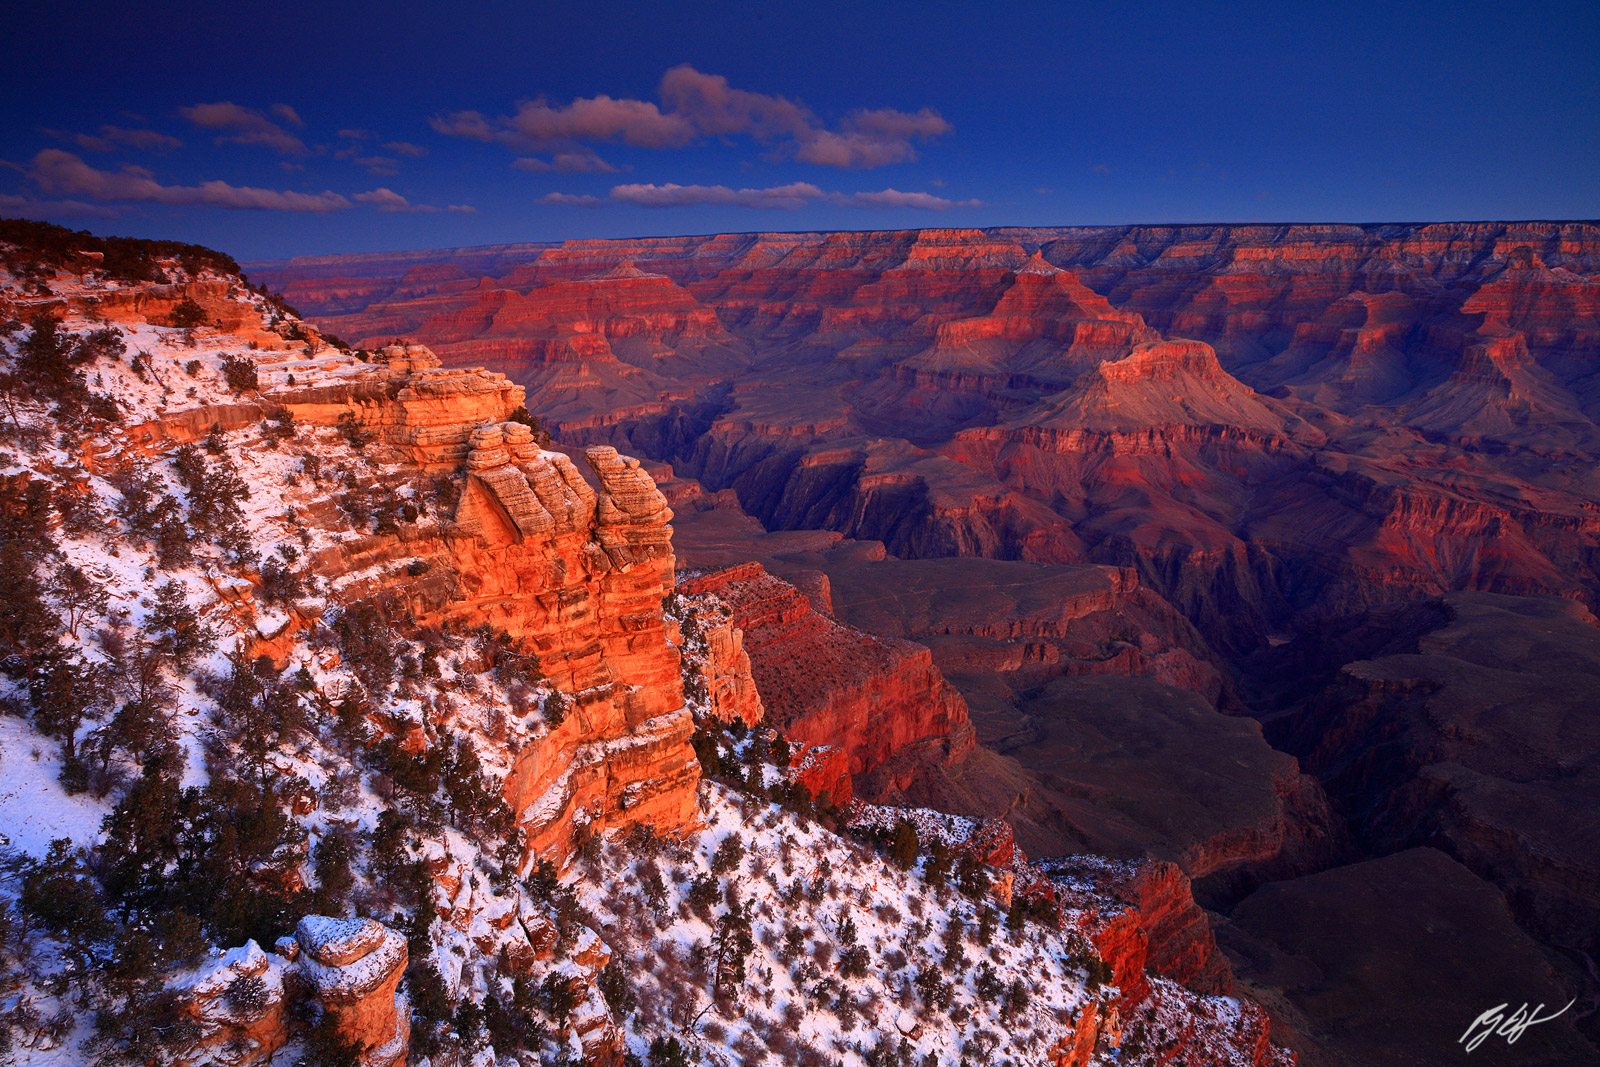 Sunrise and Fresh Snow from the South Rim of the Gand Canyon in Grand Canyon National Park in Arizona